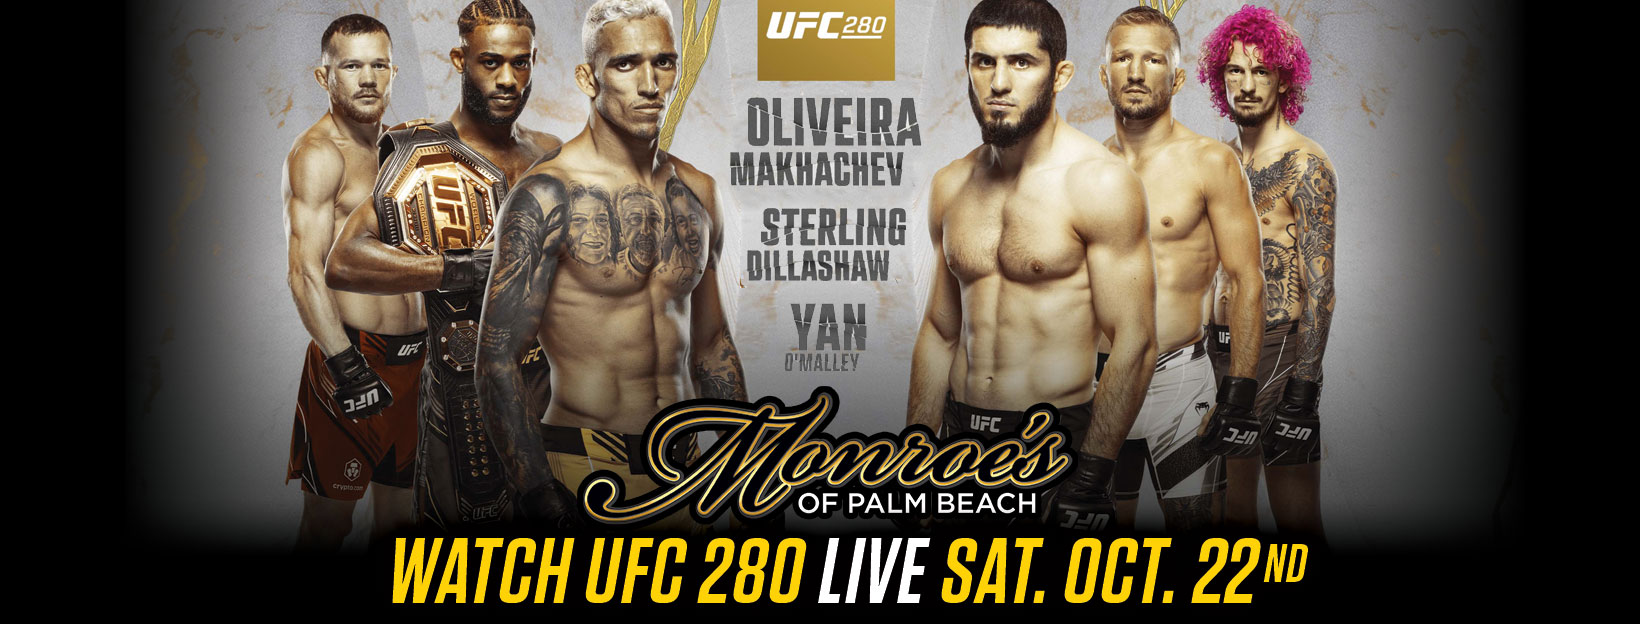 UFC 280 Live Watch Party at Monroe's Palm Beach